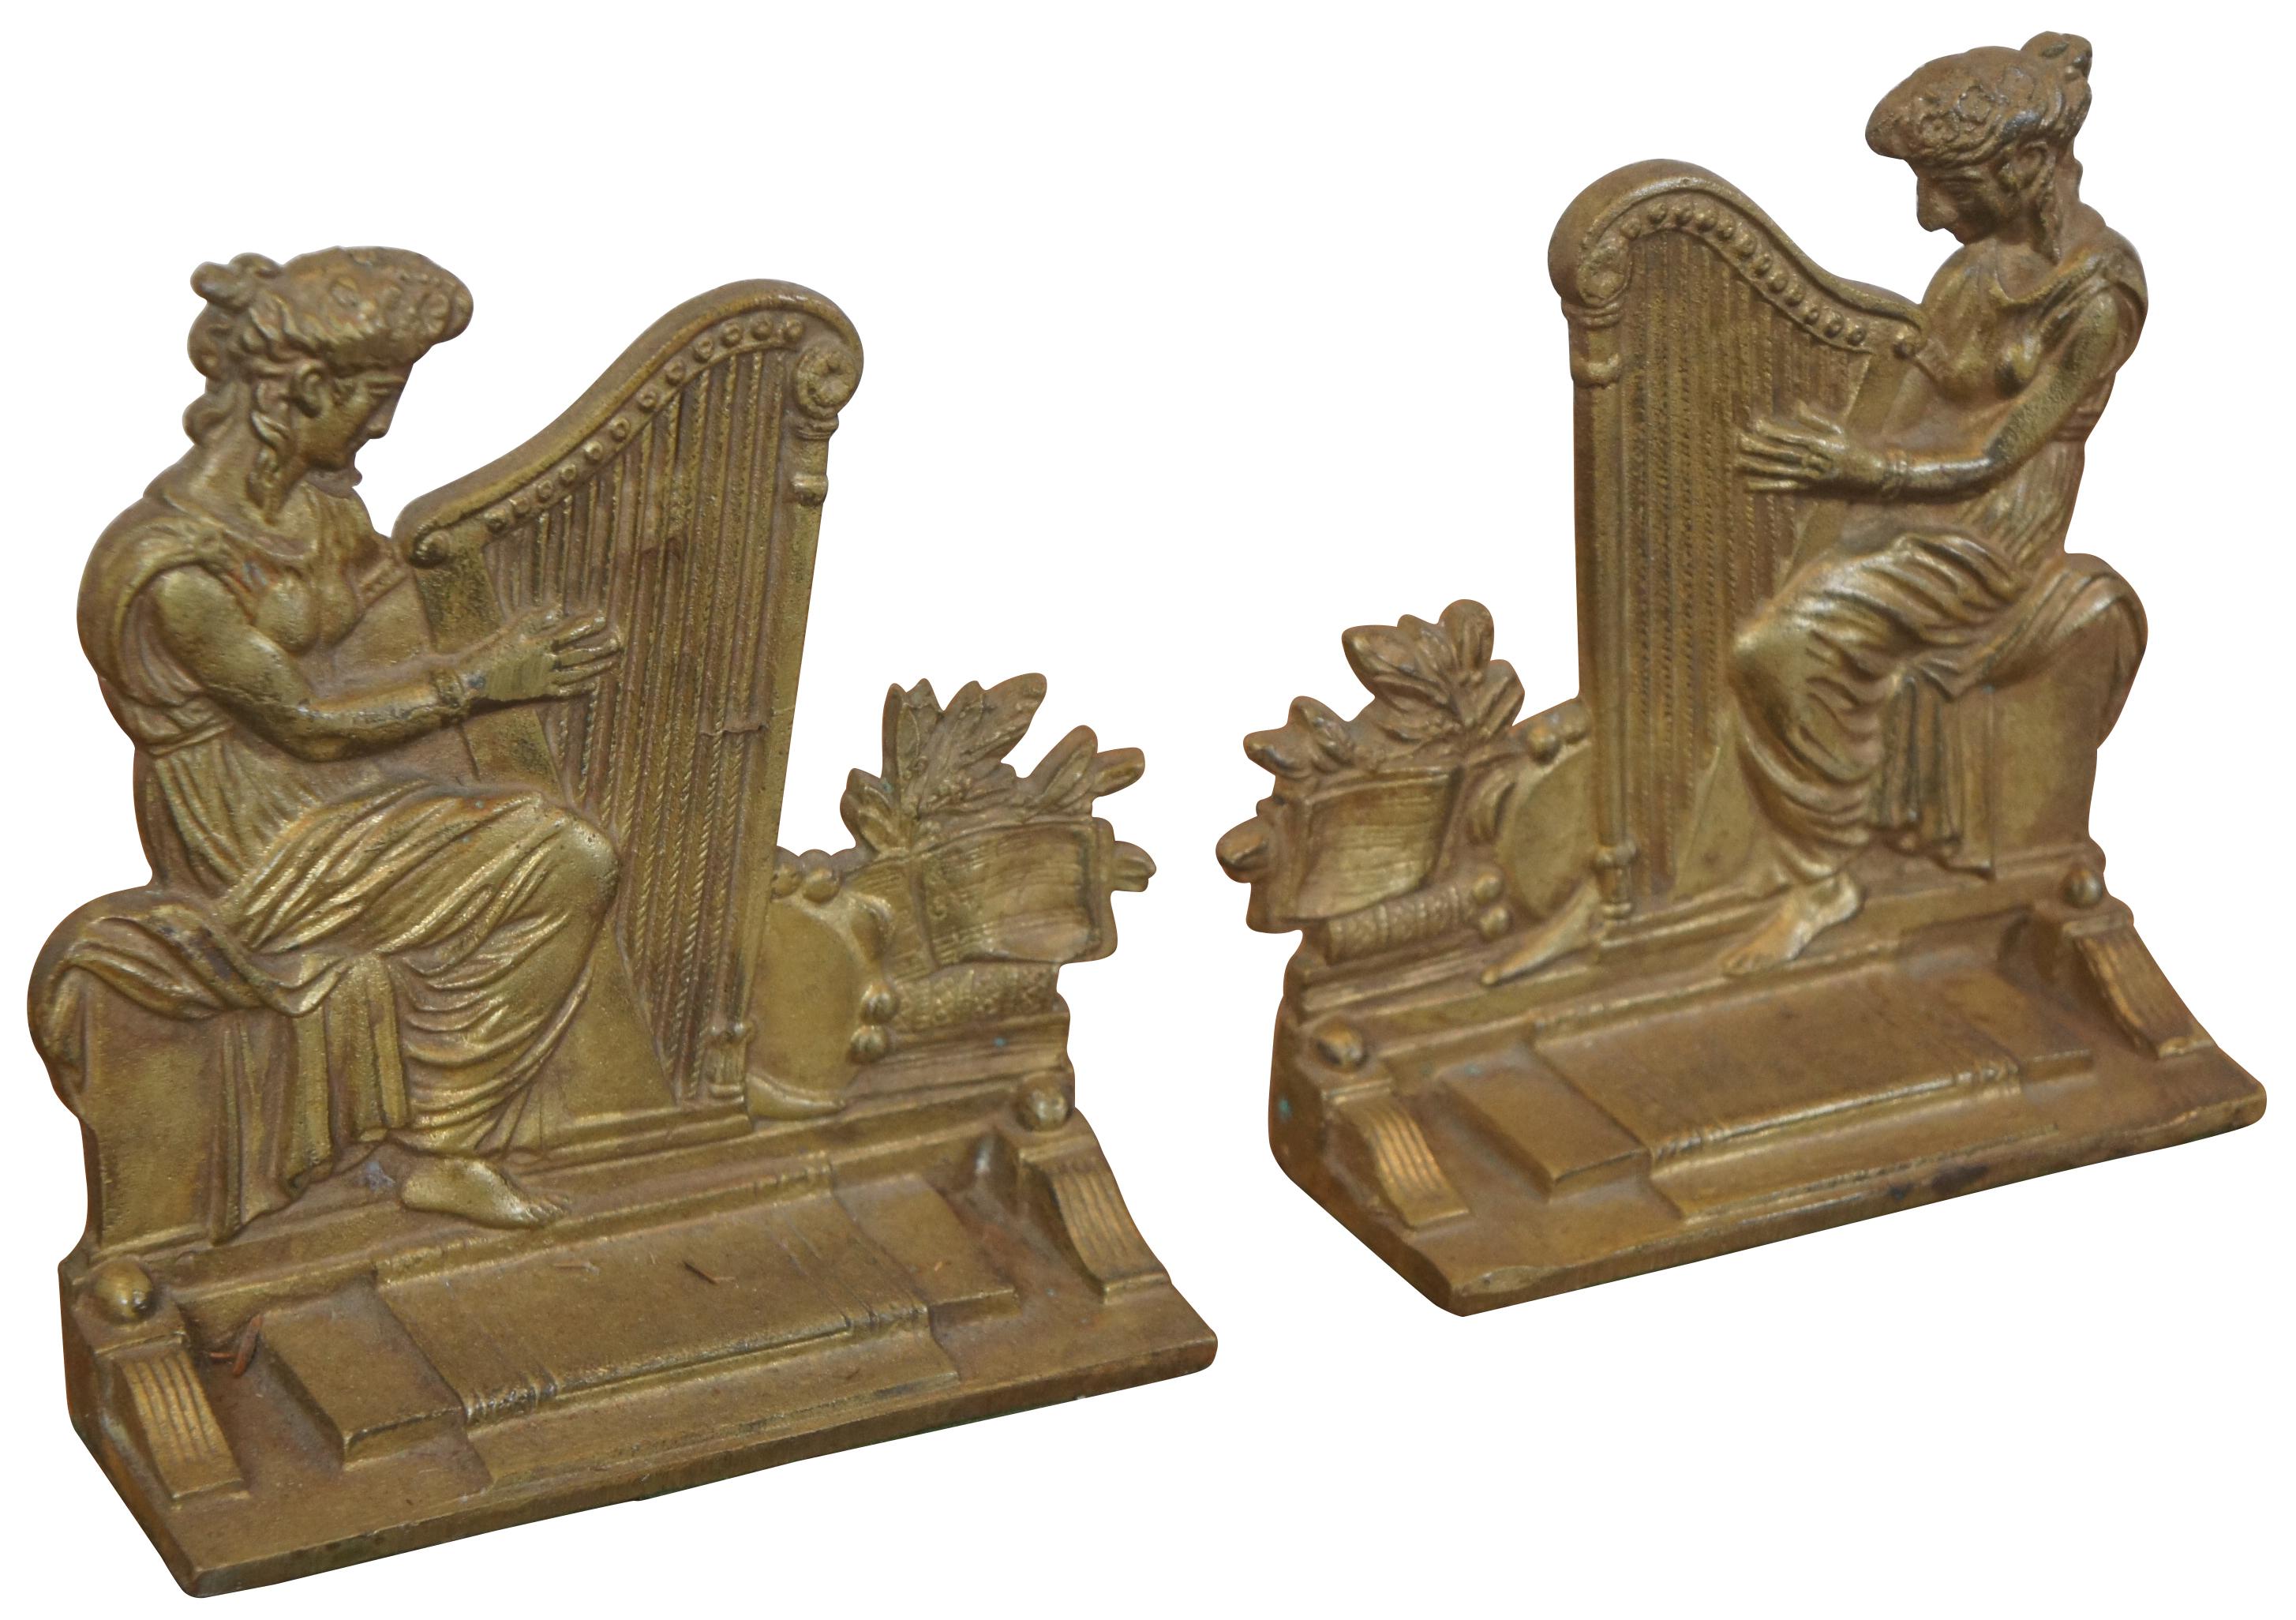 Two antique Victorian Neoclassical bronze bookends featuring a left and right facing pair of Greek or Grecian woman playing a harp (harpists). Marked England. Measure: 7